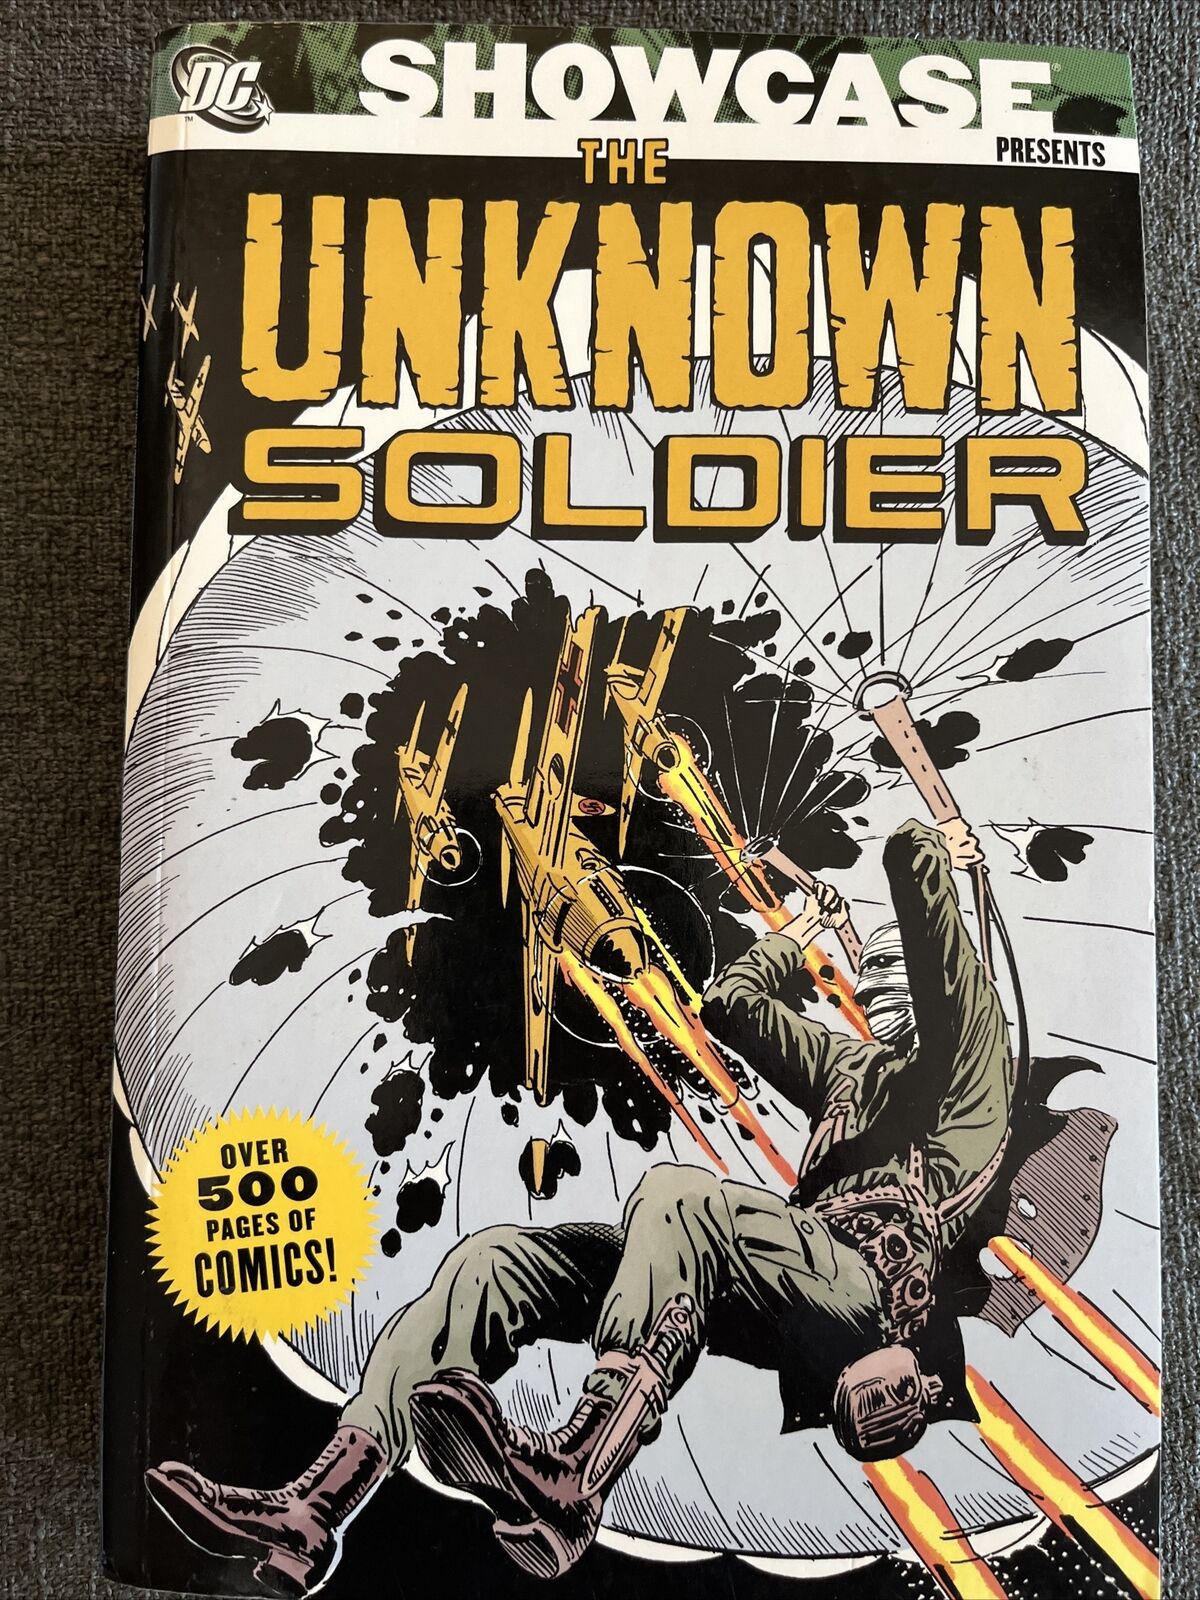 Showcase Presents: the Unknown Soldier #1 (DC Comics 2006 January 2007)